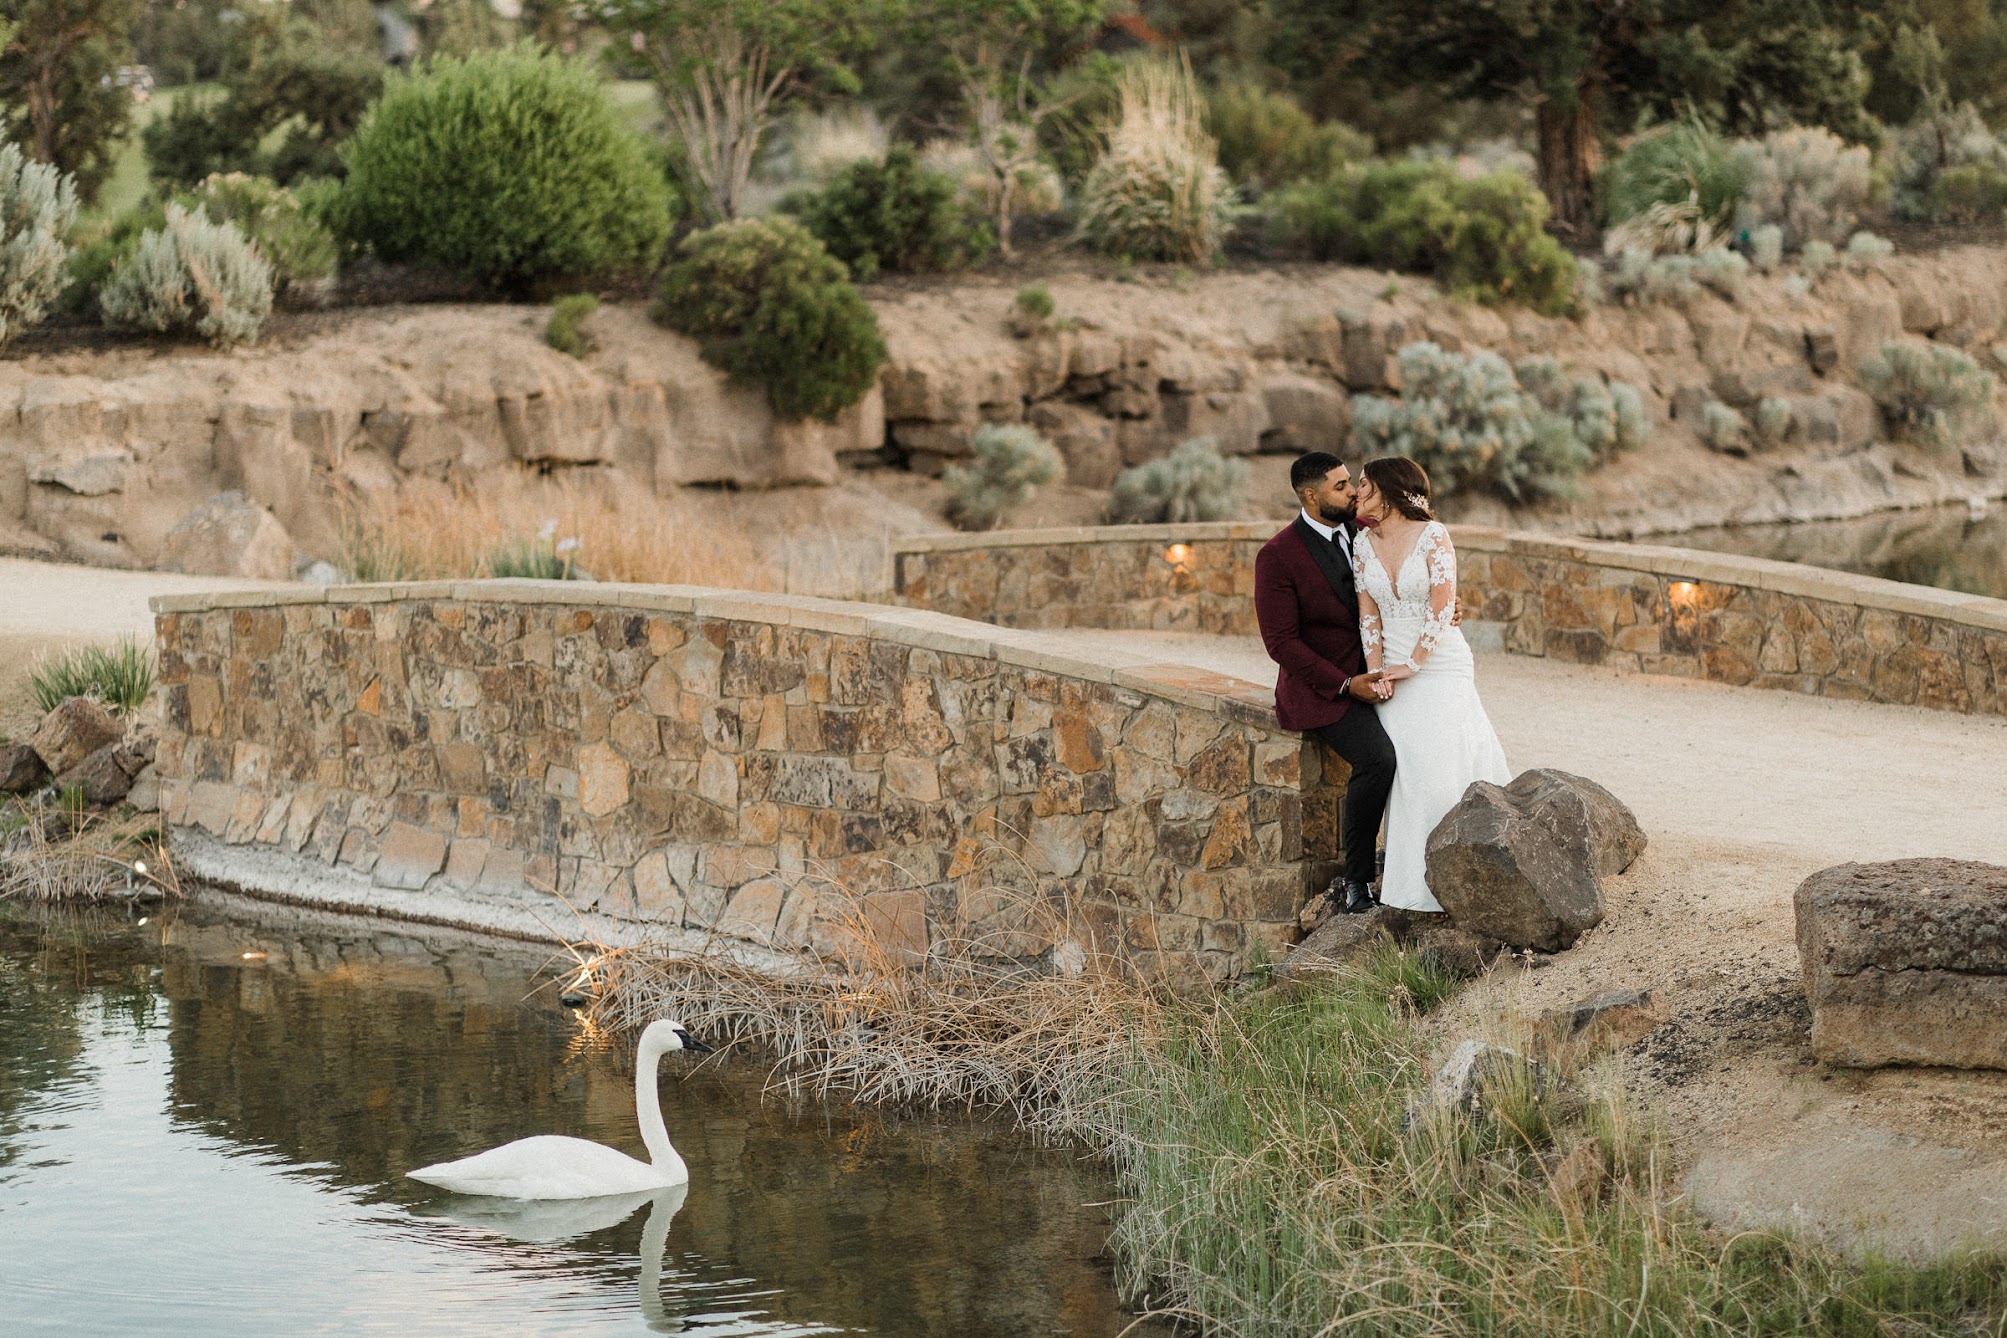 the couple sitting on a Tuscan like bridge, while kissing and a adult swan is swimming by